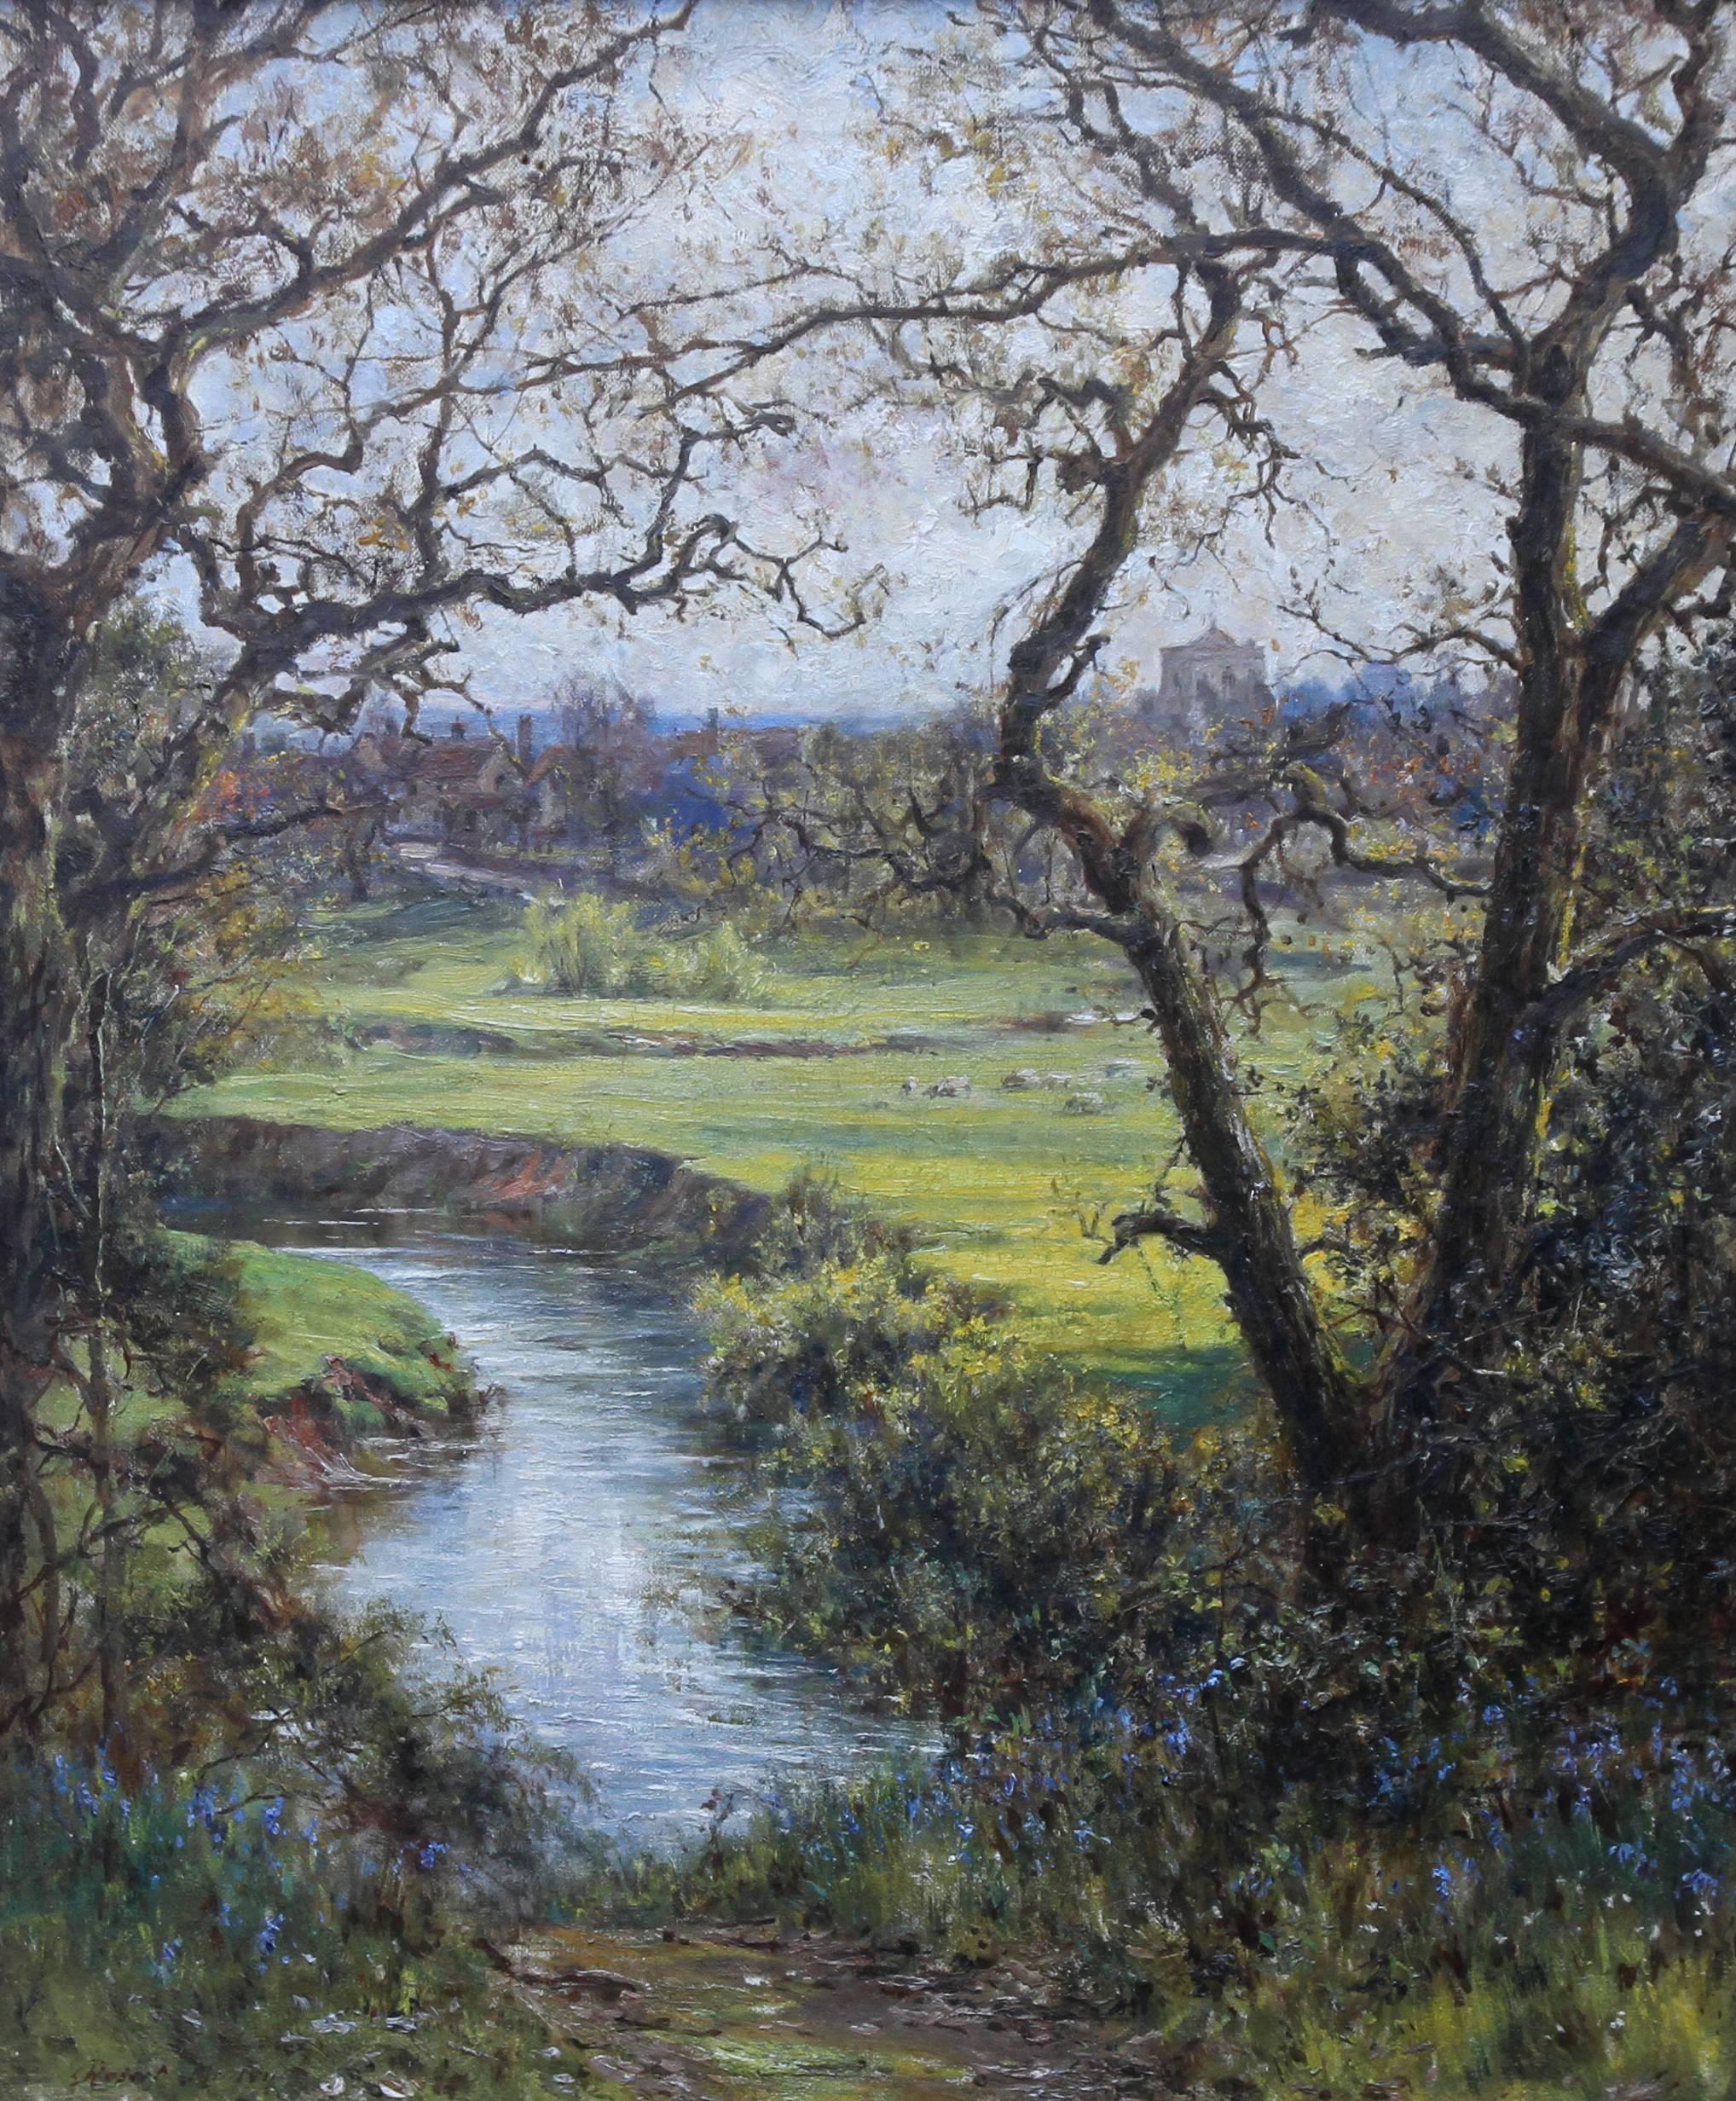 Surrey Landscape - British early 20thC Impressionist Slade School oil painting  - Painting by Robert Morley